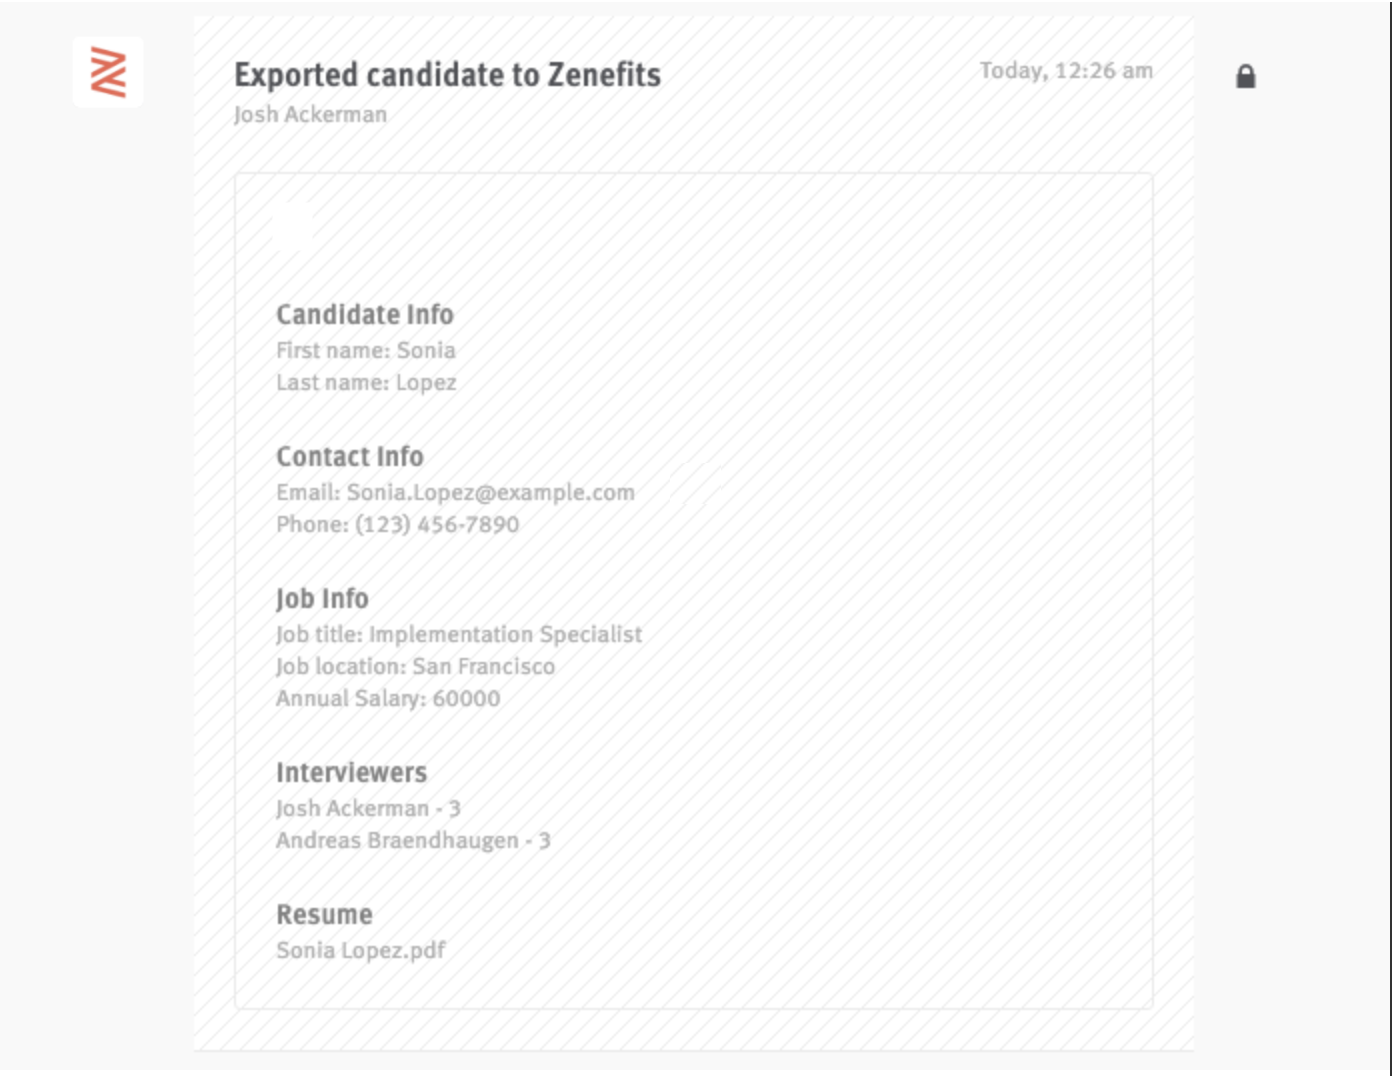 Lever candidate profile with exported candidate to zenefits information